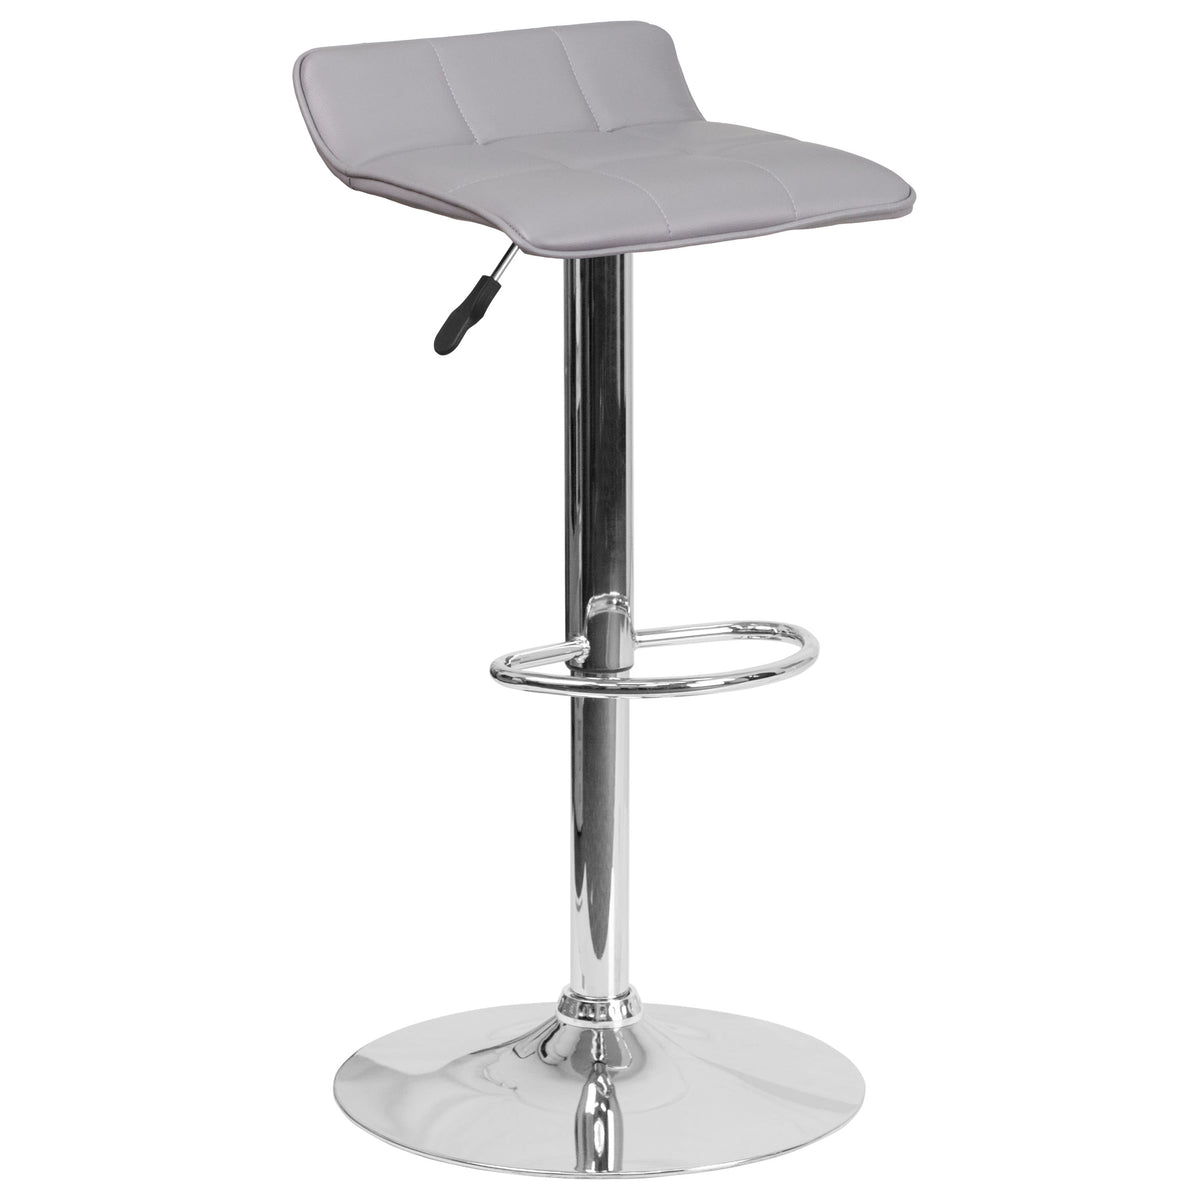 Gray |#| Gray Vinyl Adjustable Height Barstool with Quilted Wave Seat and Chrome Base